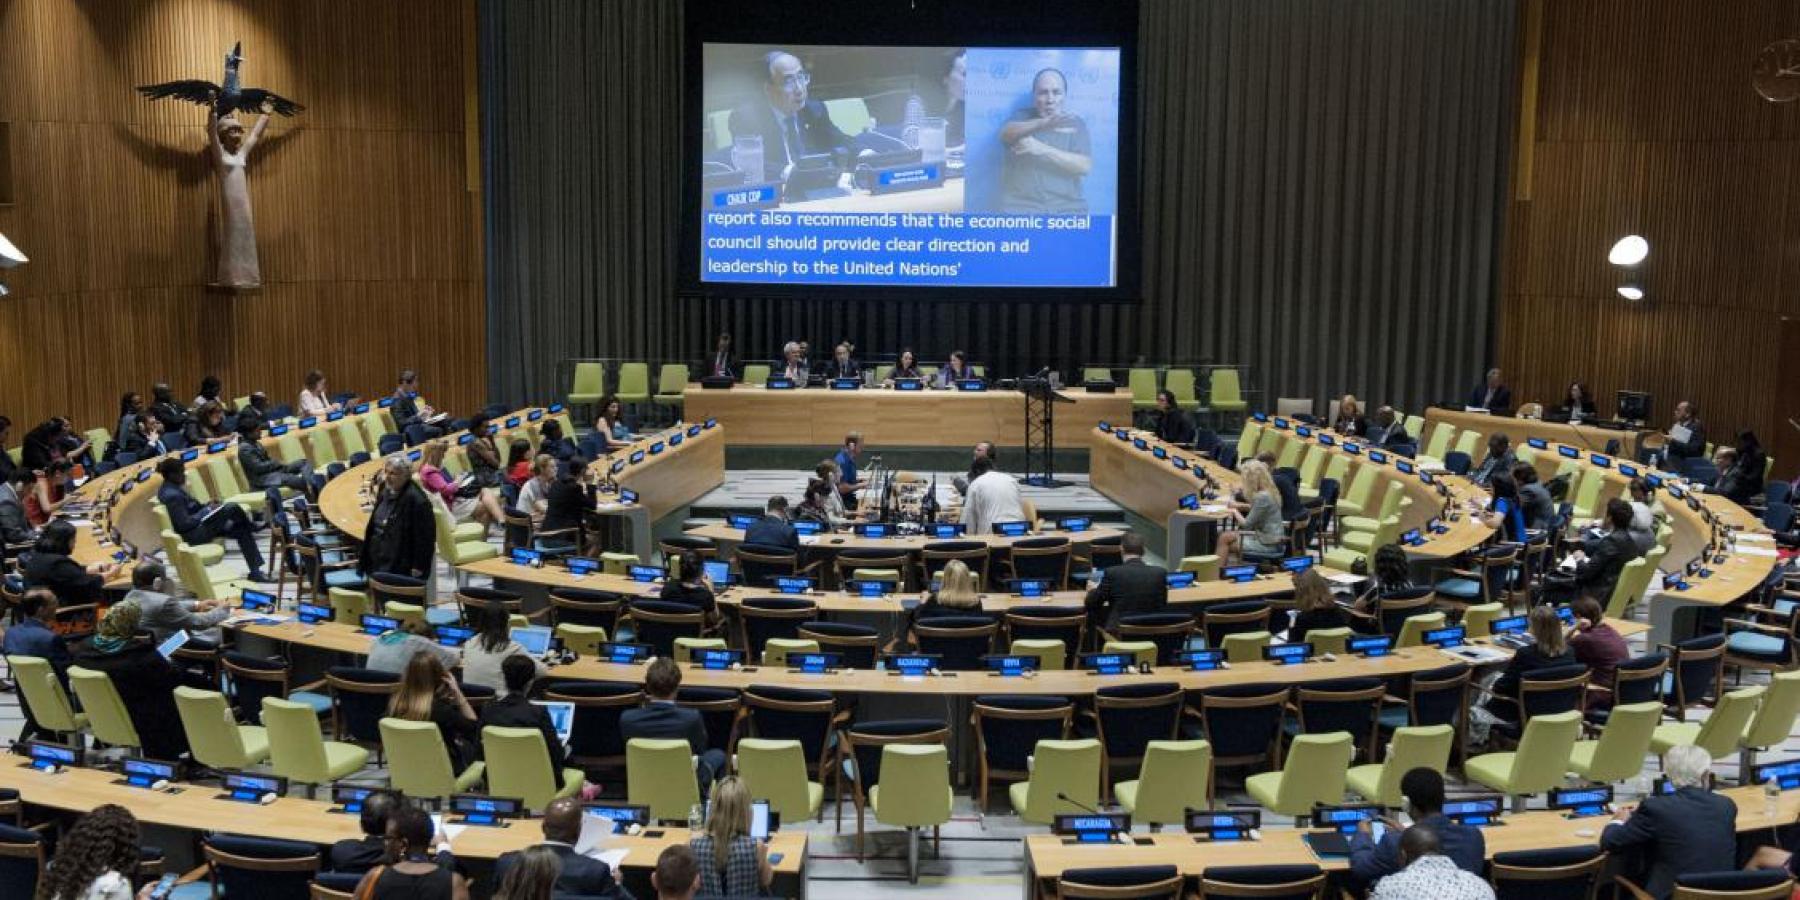 17 High Level Political Forum On Sustainable Development Asserts Commitment To Ncds Ncd Alliance